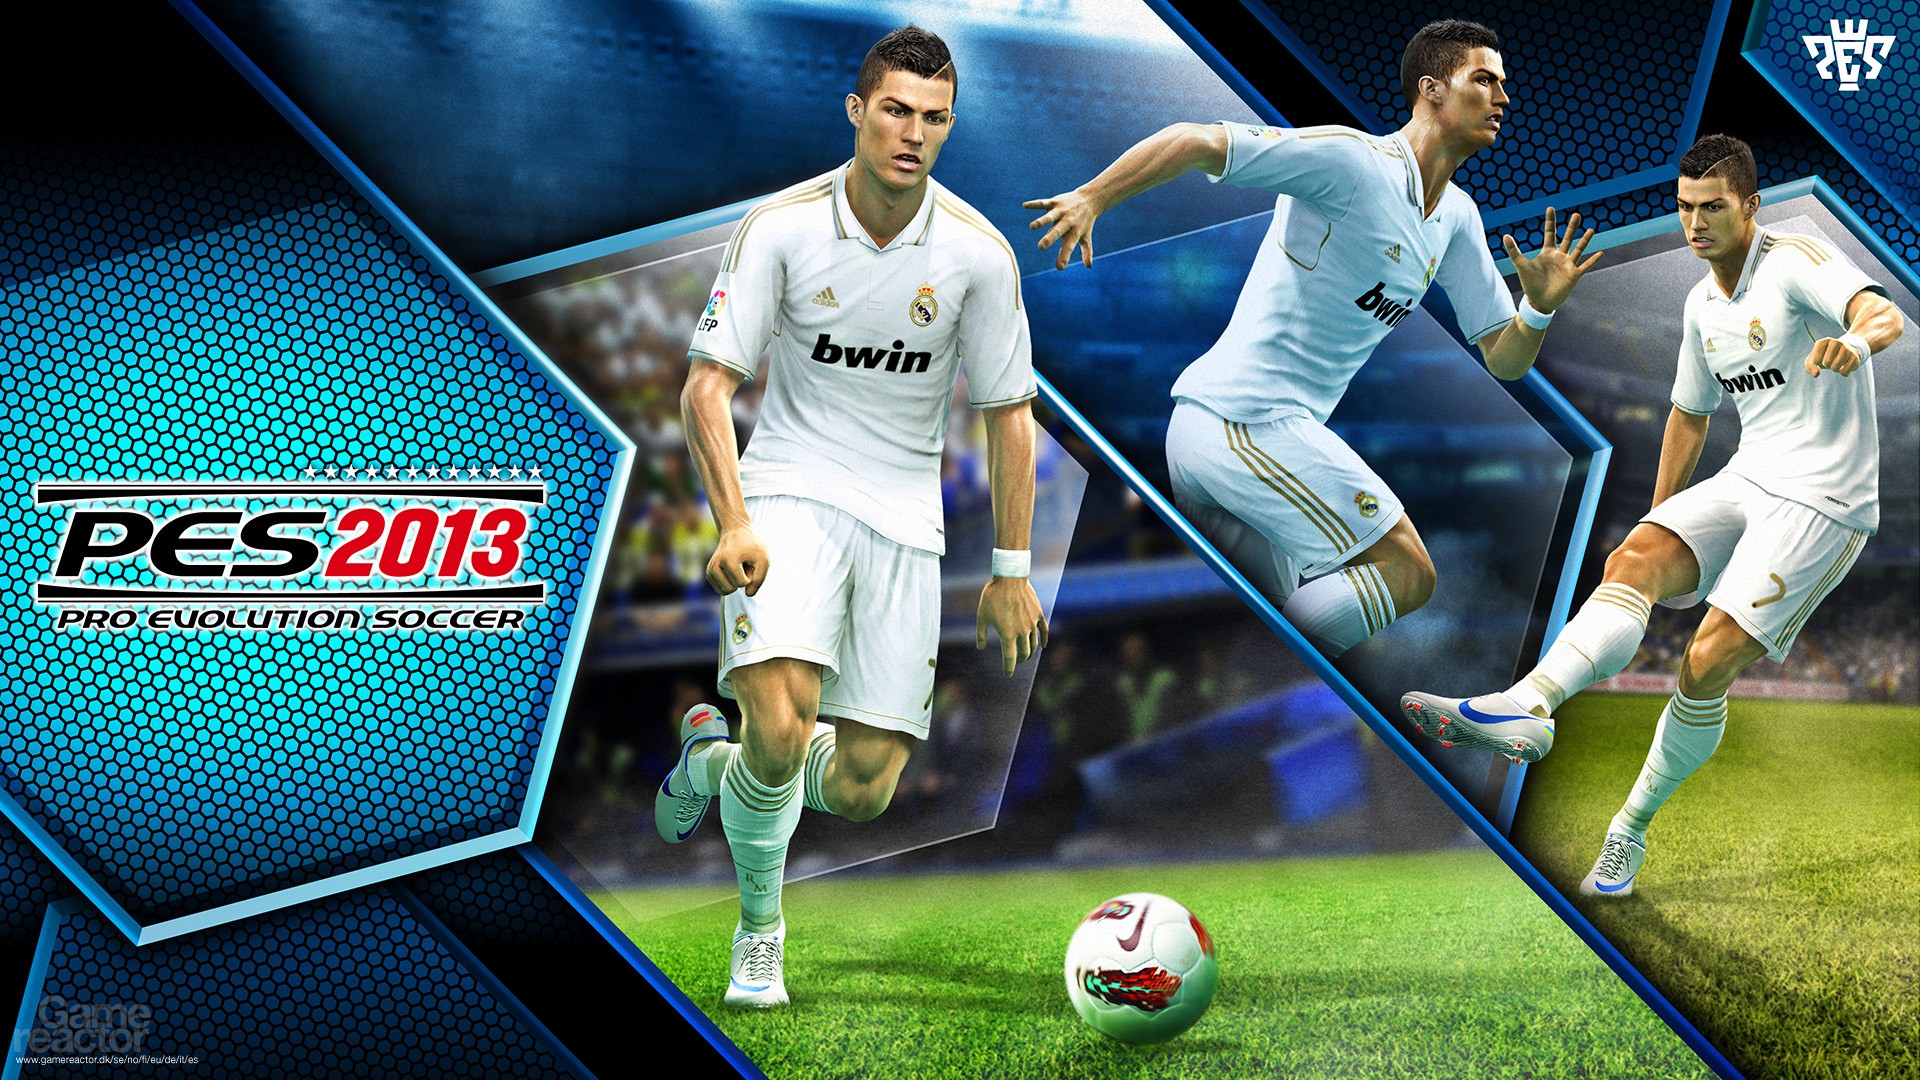 download game pes 2013 ppsspp 80mb